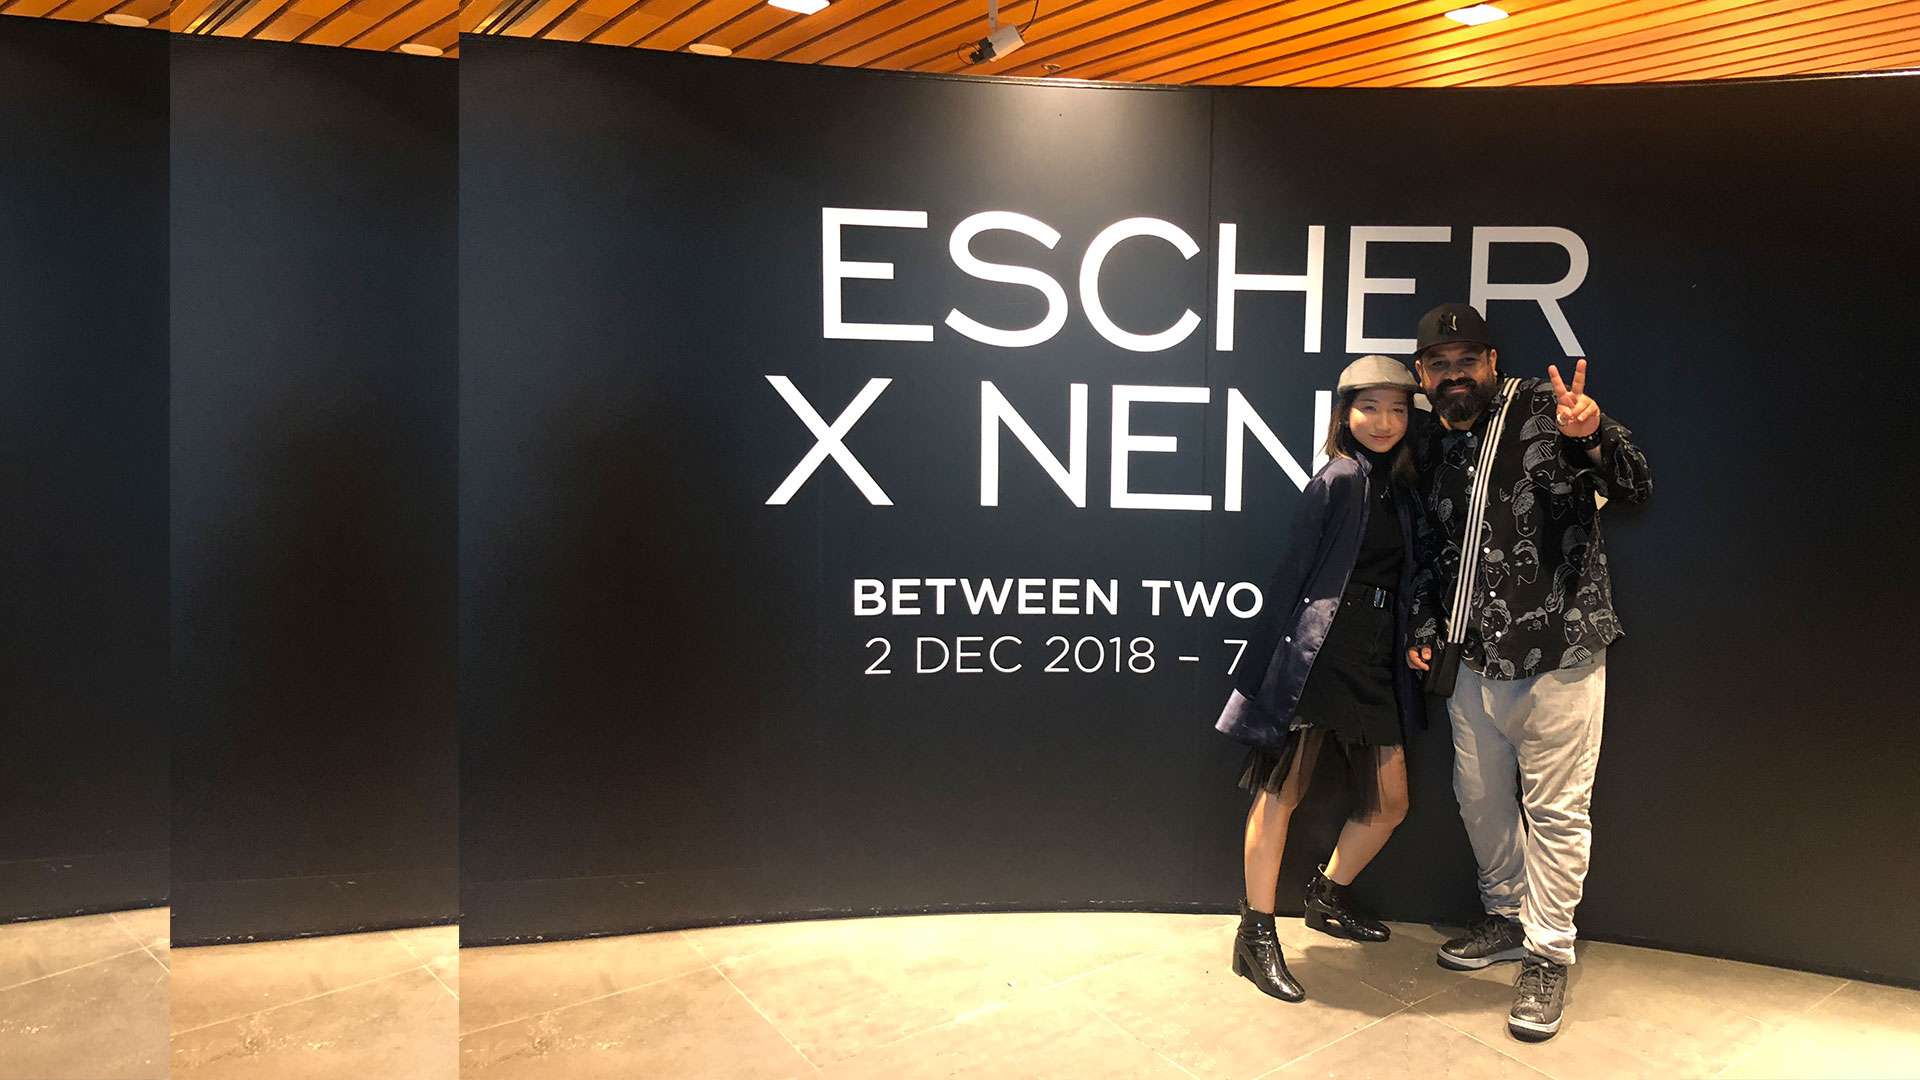 After much anticipation we visited the Escher x Nendo Show at the NGV